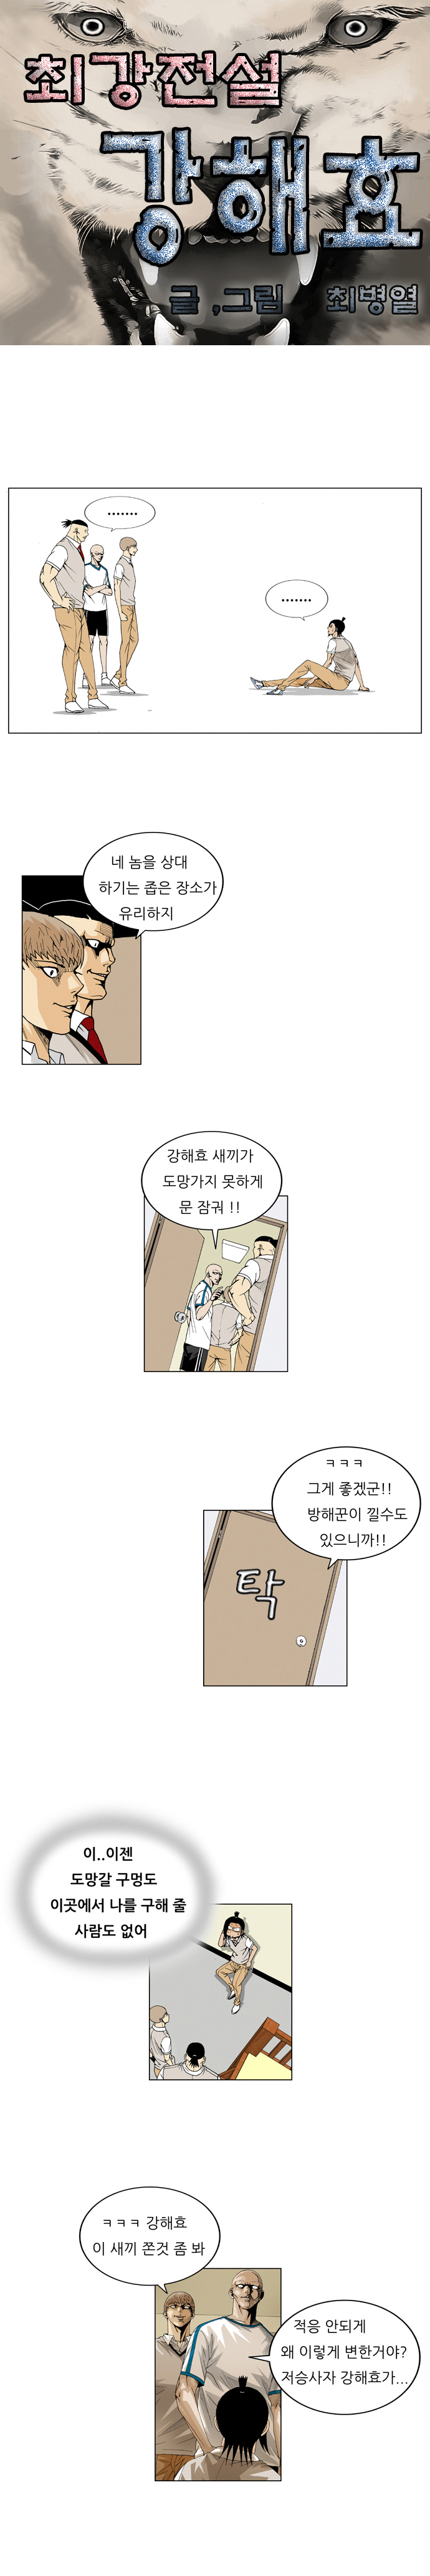 Ultimate Legend - Kang Hae Hyo - Chapter 51 - Page 2